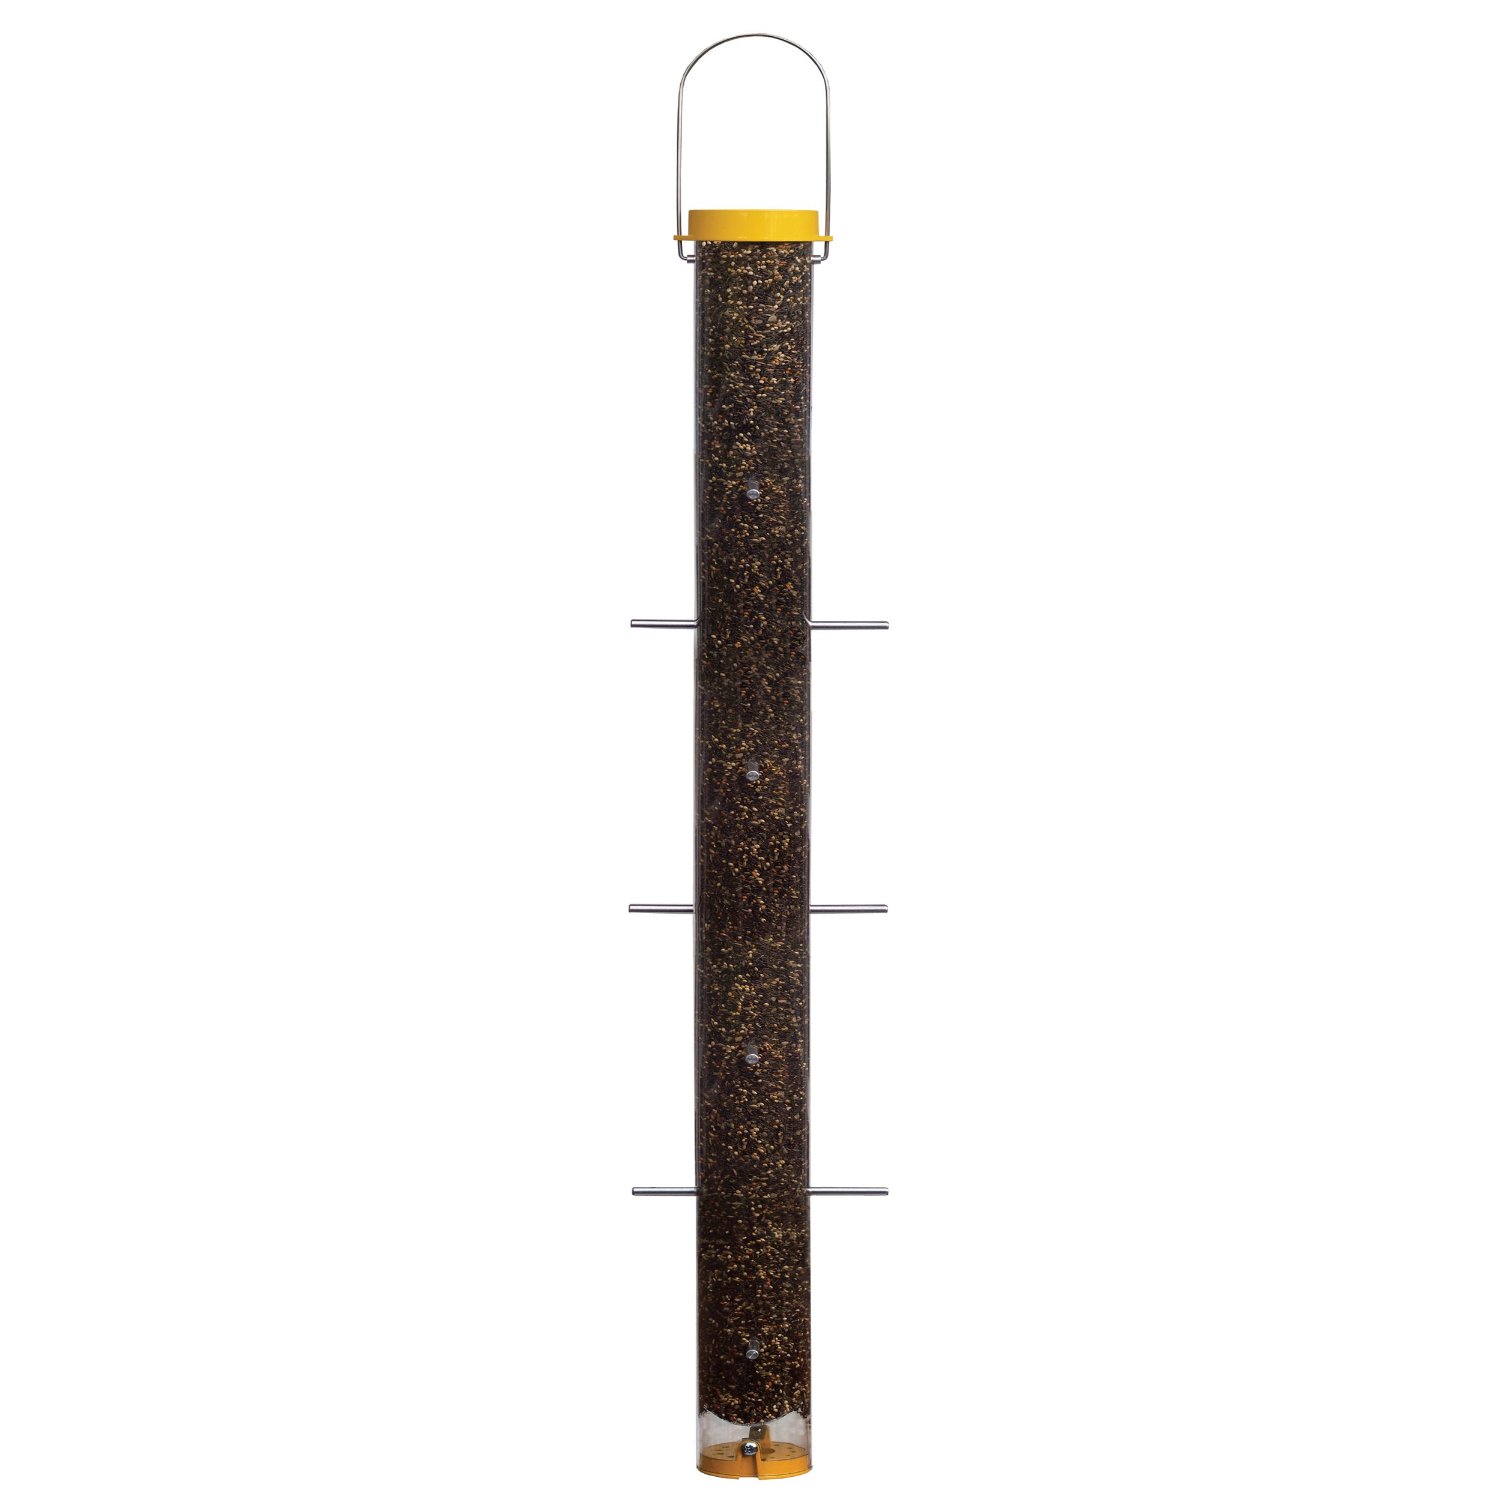 Droll Yankees Bottoms Up Finch Feeder, 36 in.